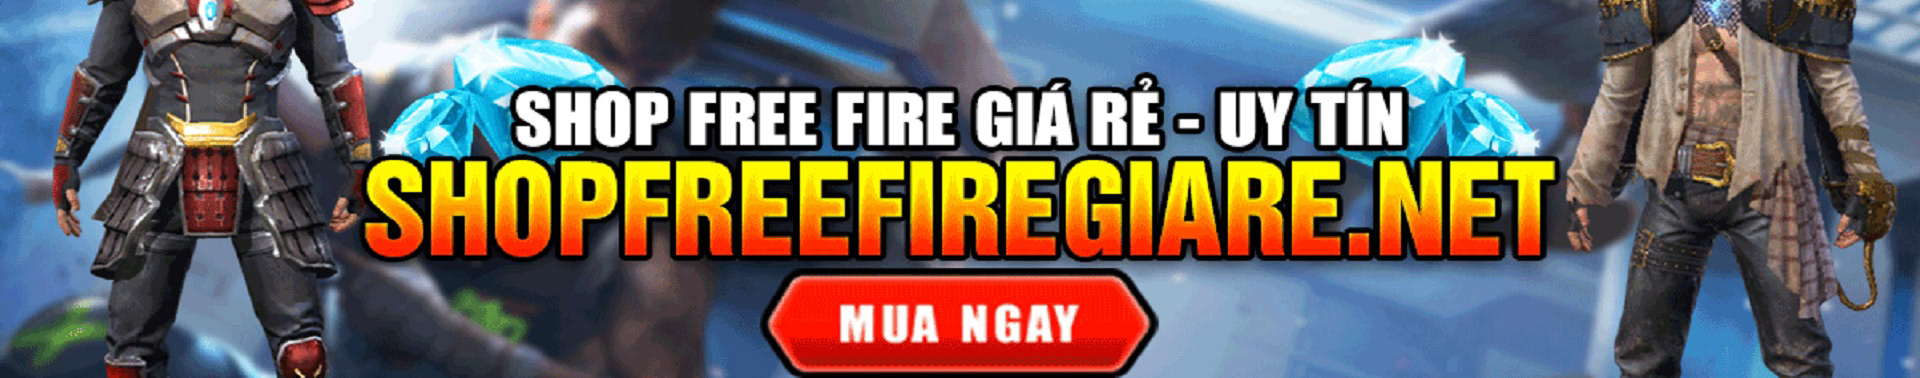 Shop Free Fire Giá Rẻ's profile banner